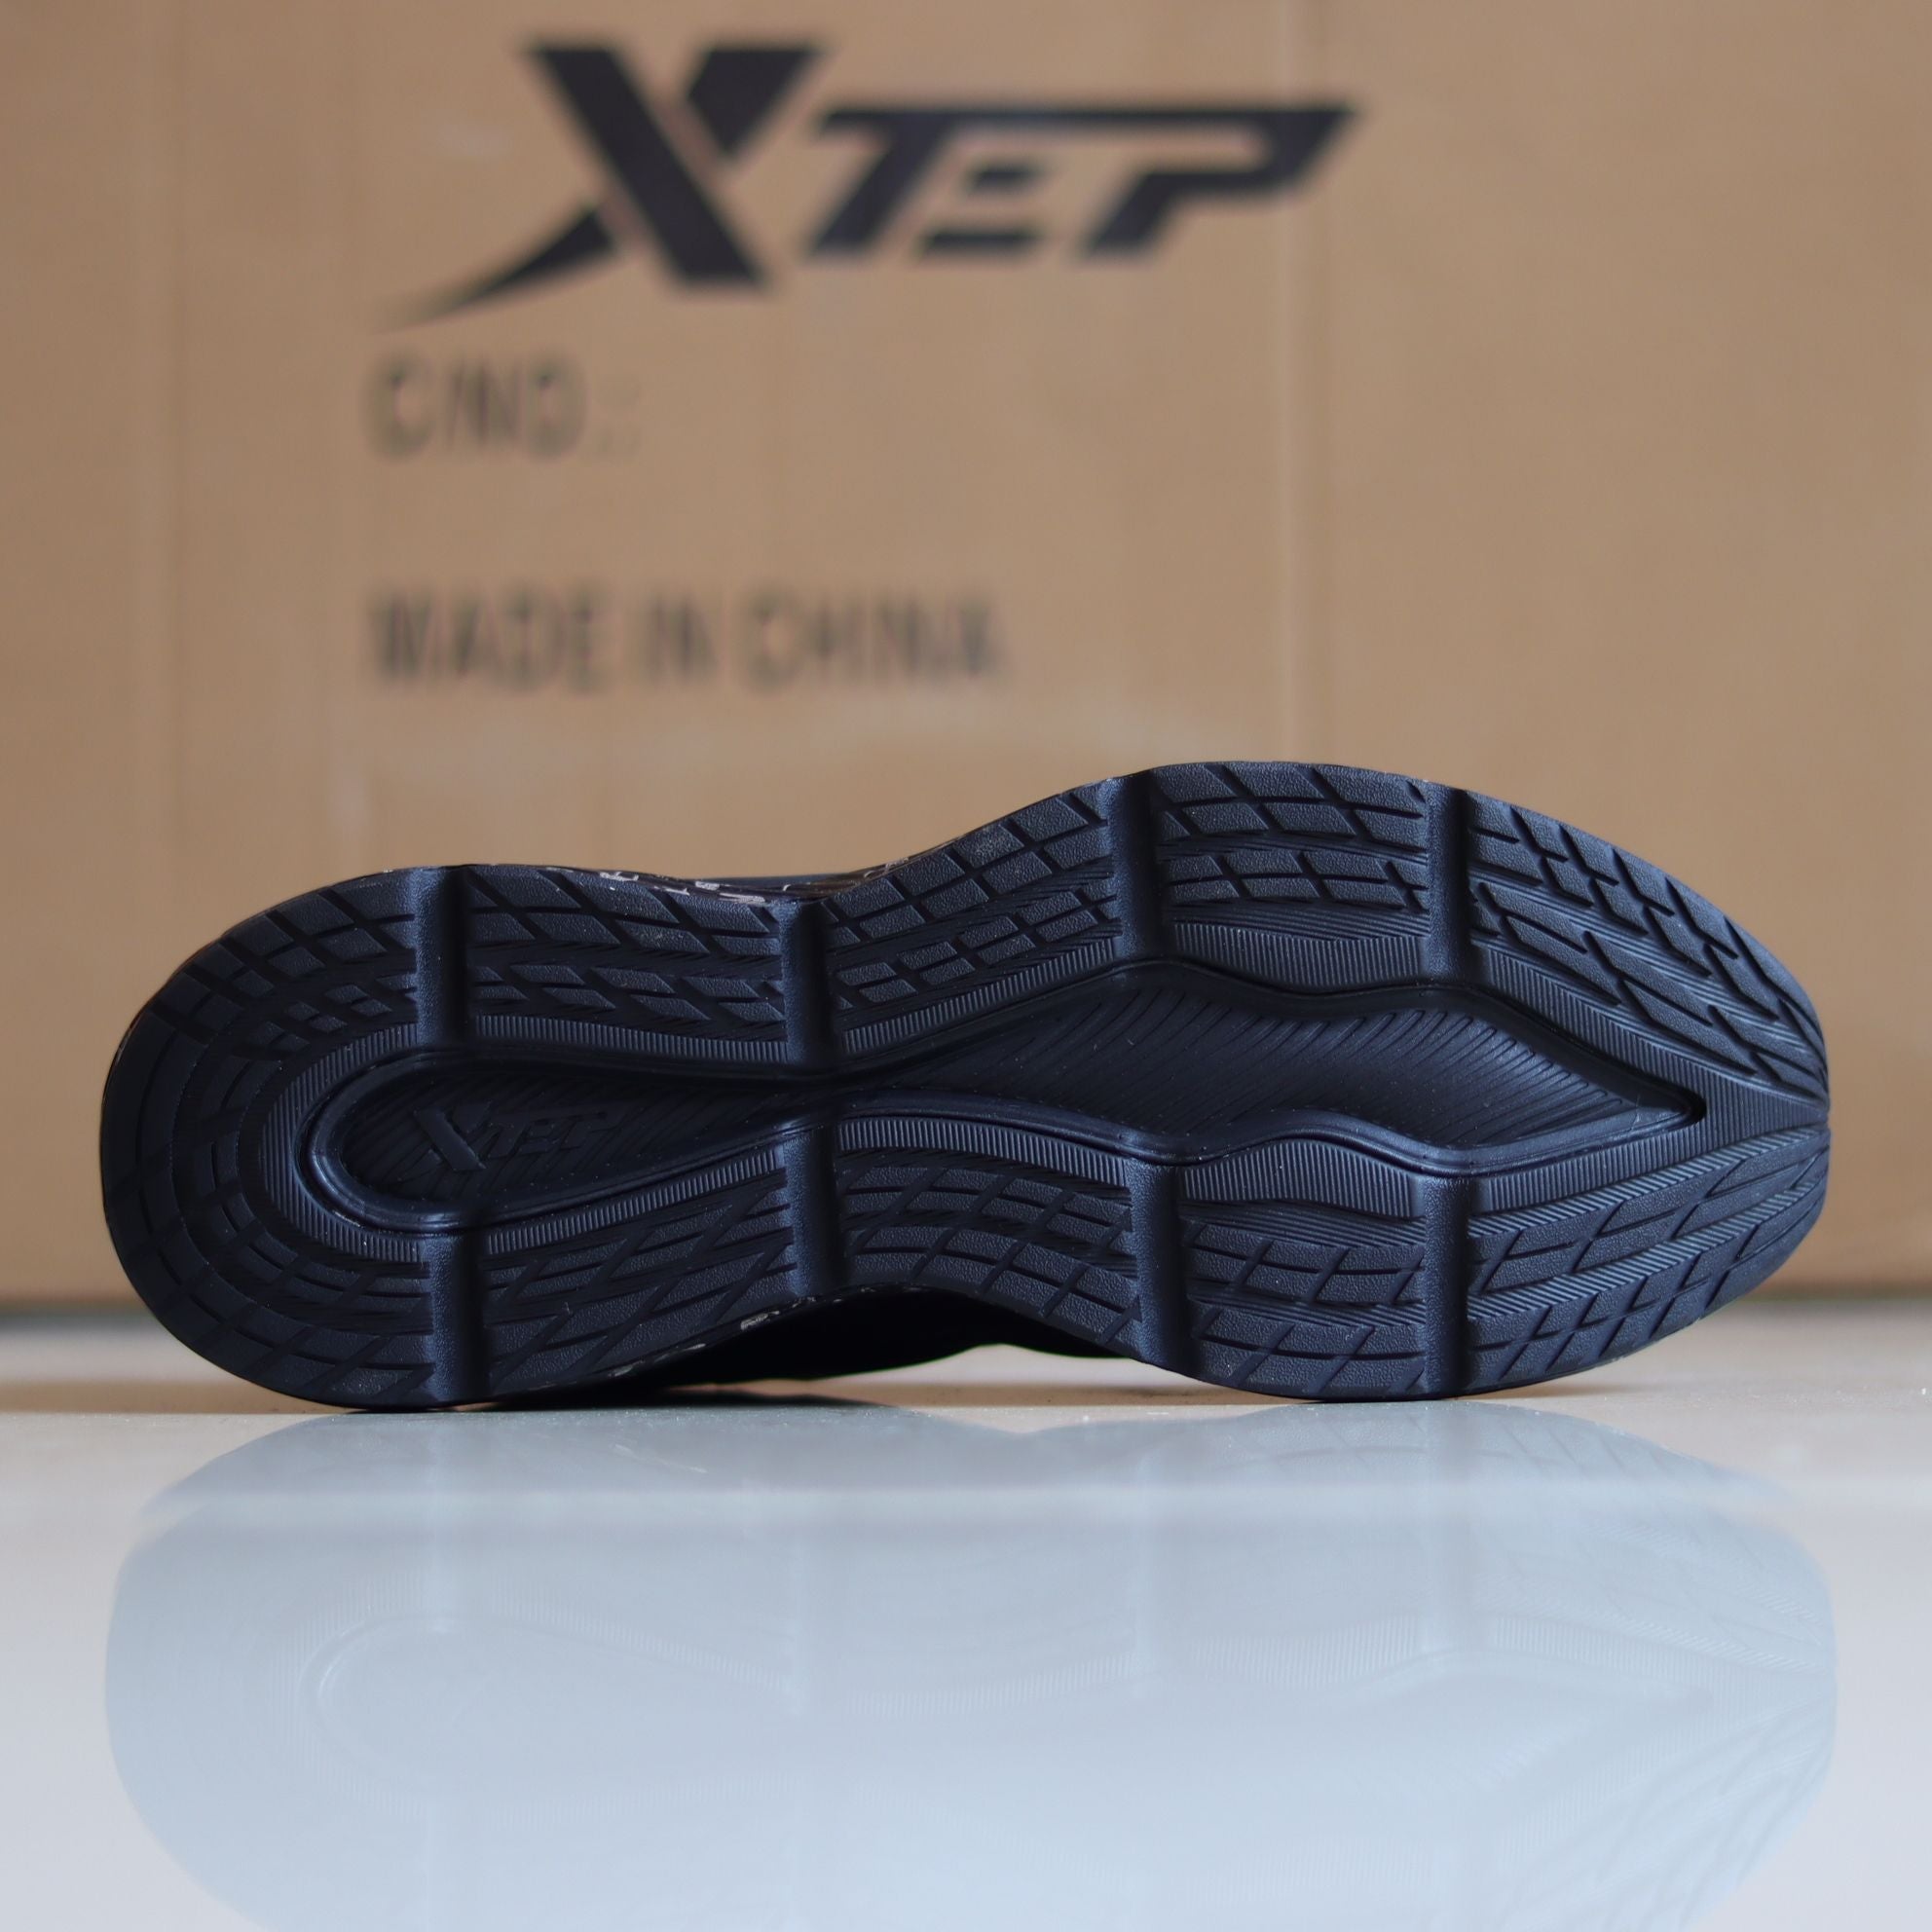 X51 - Women's Medicated Running Shoe by Xtep